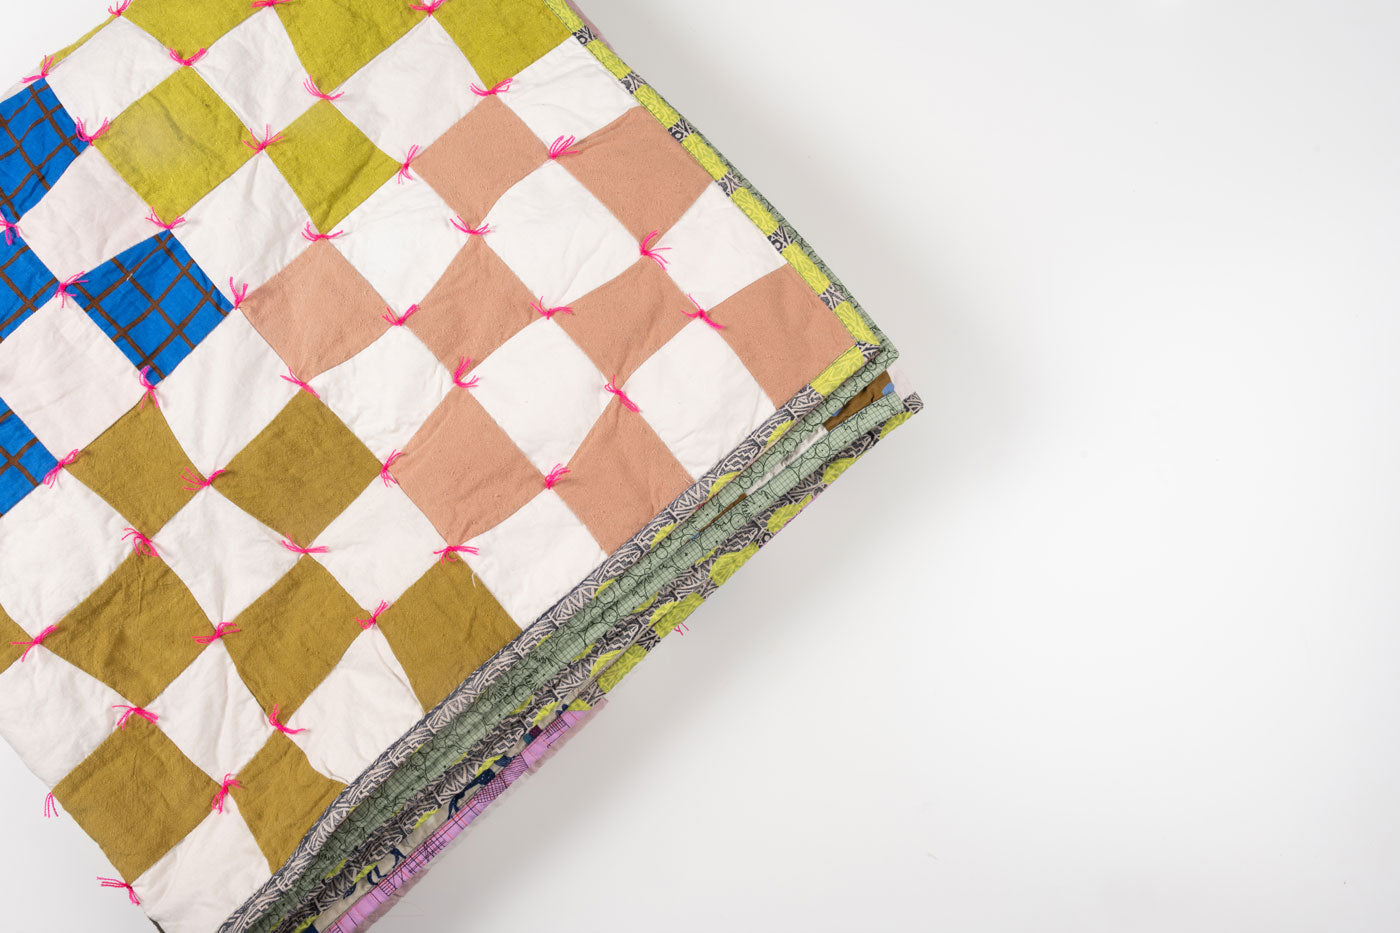 Shawna's Omega Quilt is folded into a square in front of a white background